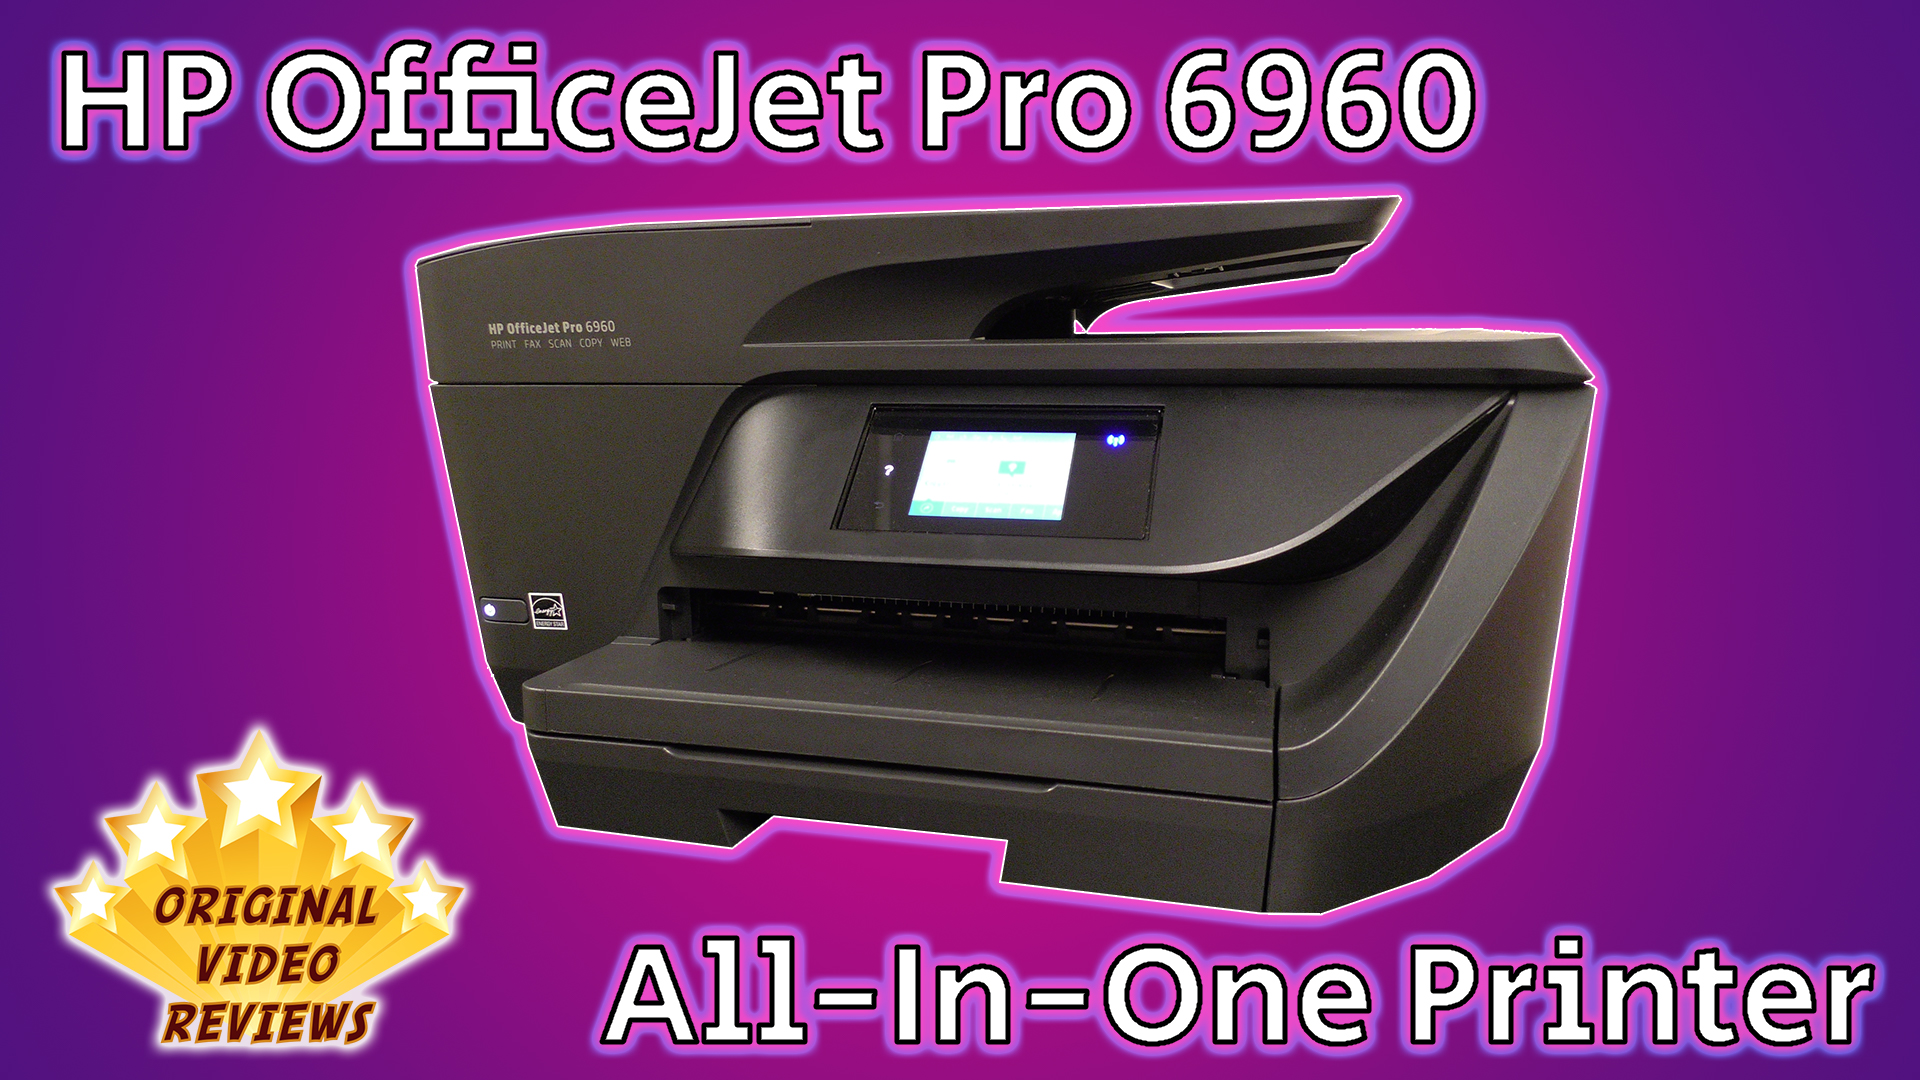 HP OfficeJet Pro 6960 All-in-One Printer Review (Thumbnail)